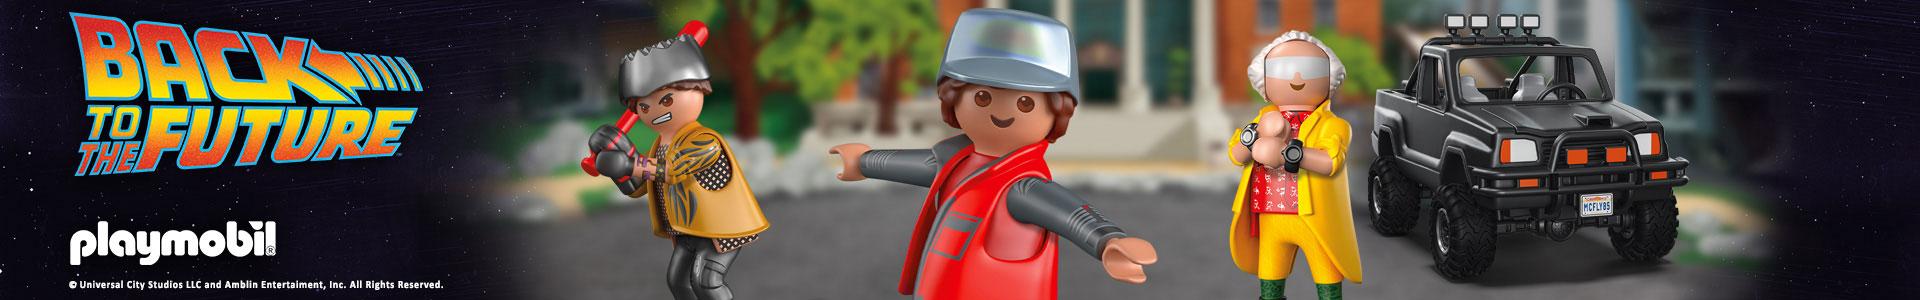 Playmobil - Back to the Future